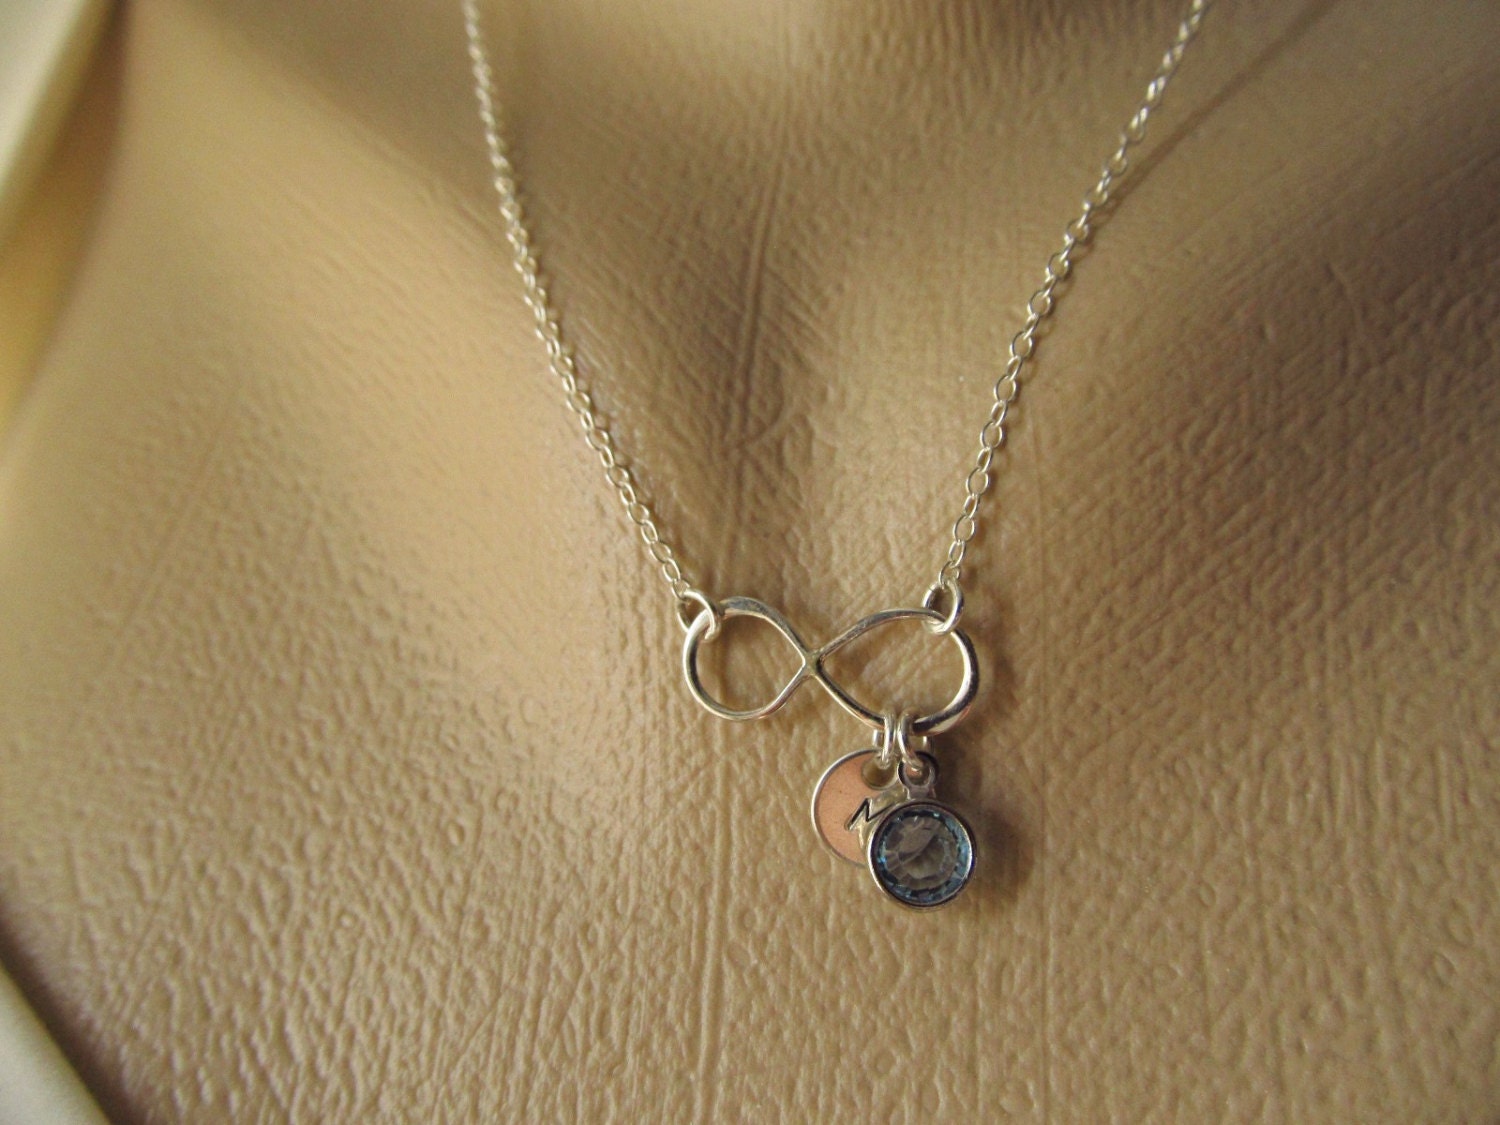 Personalized Infinity Necklace With Initial and Birthstone - Etsy